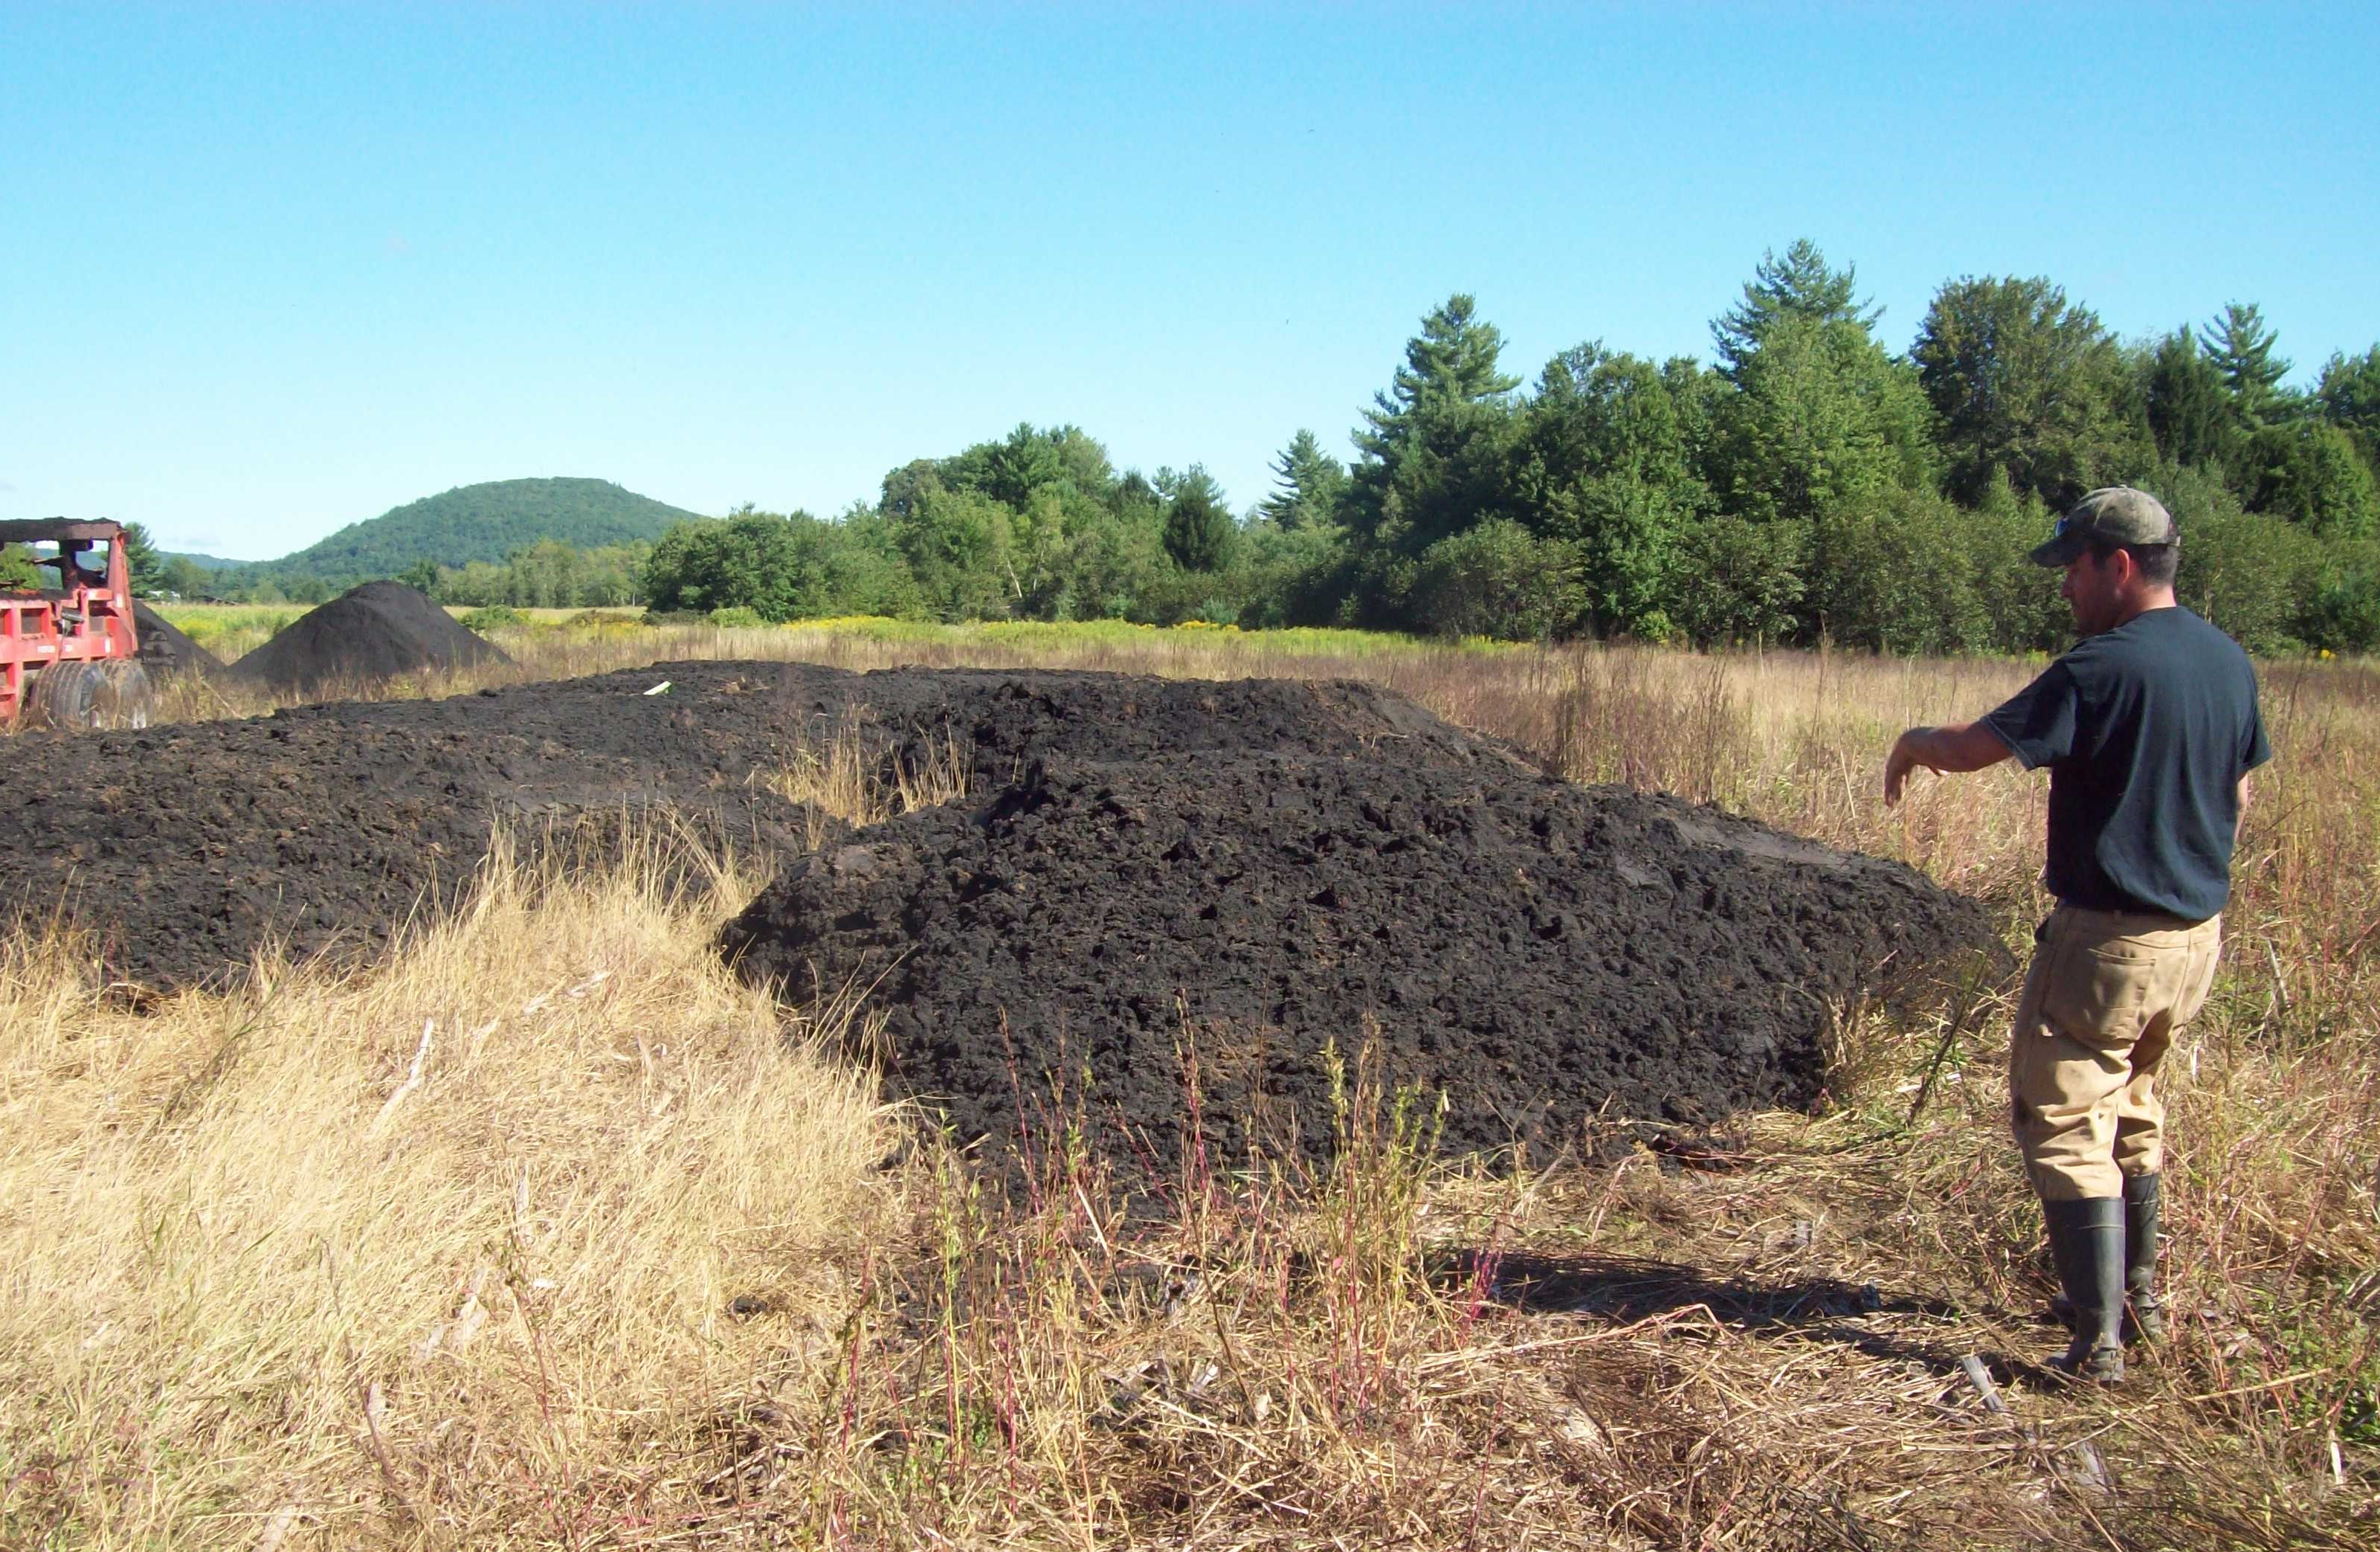 fall view of a field with biosoilds that have been dumped and are about to be spread at the direction of a consultant 